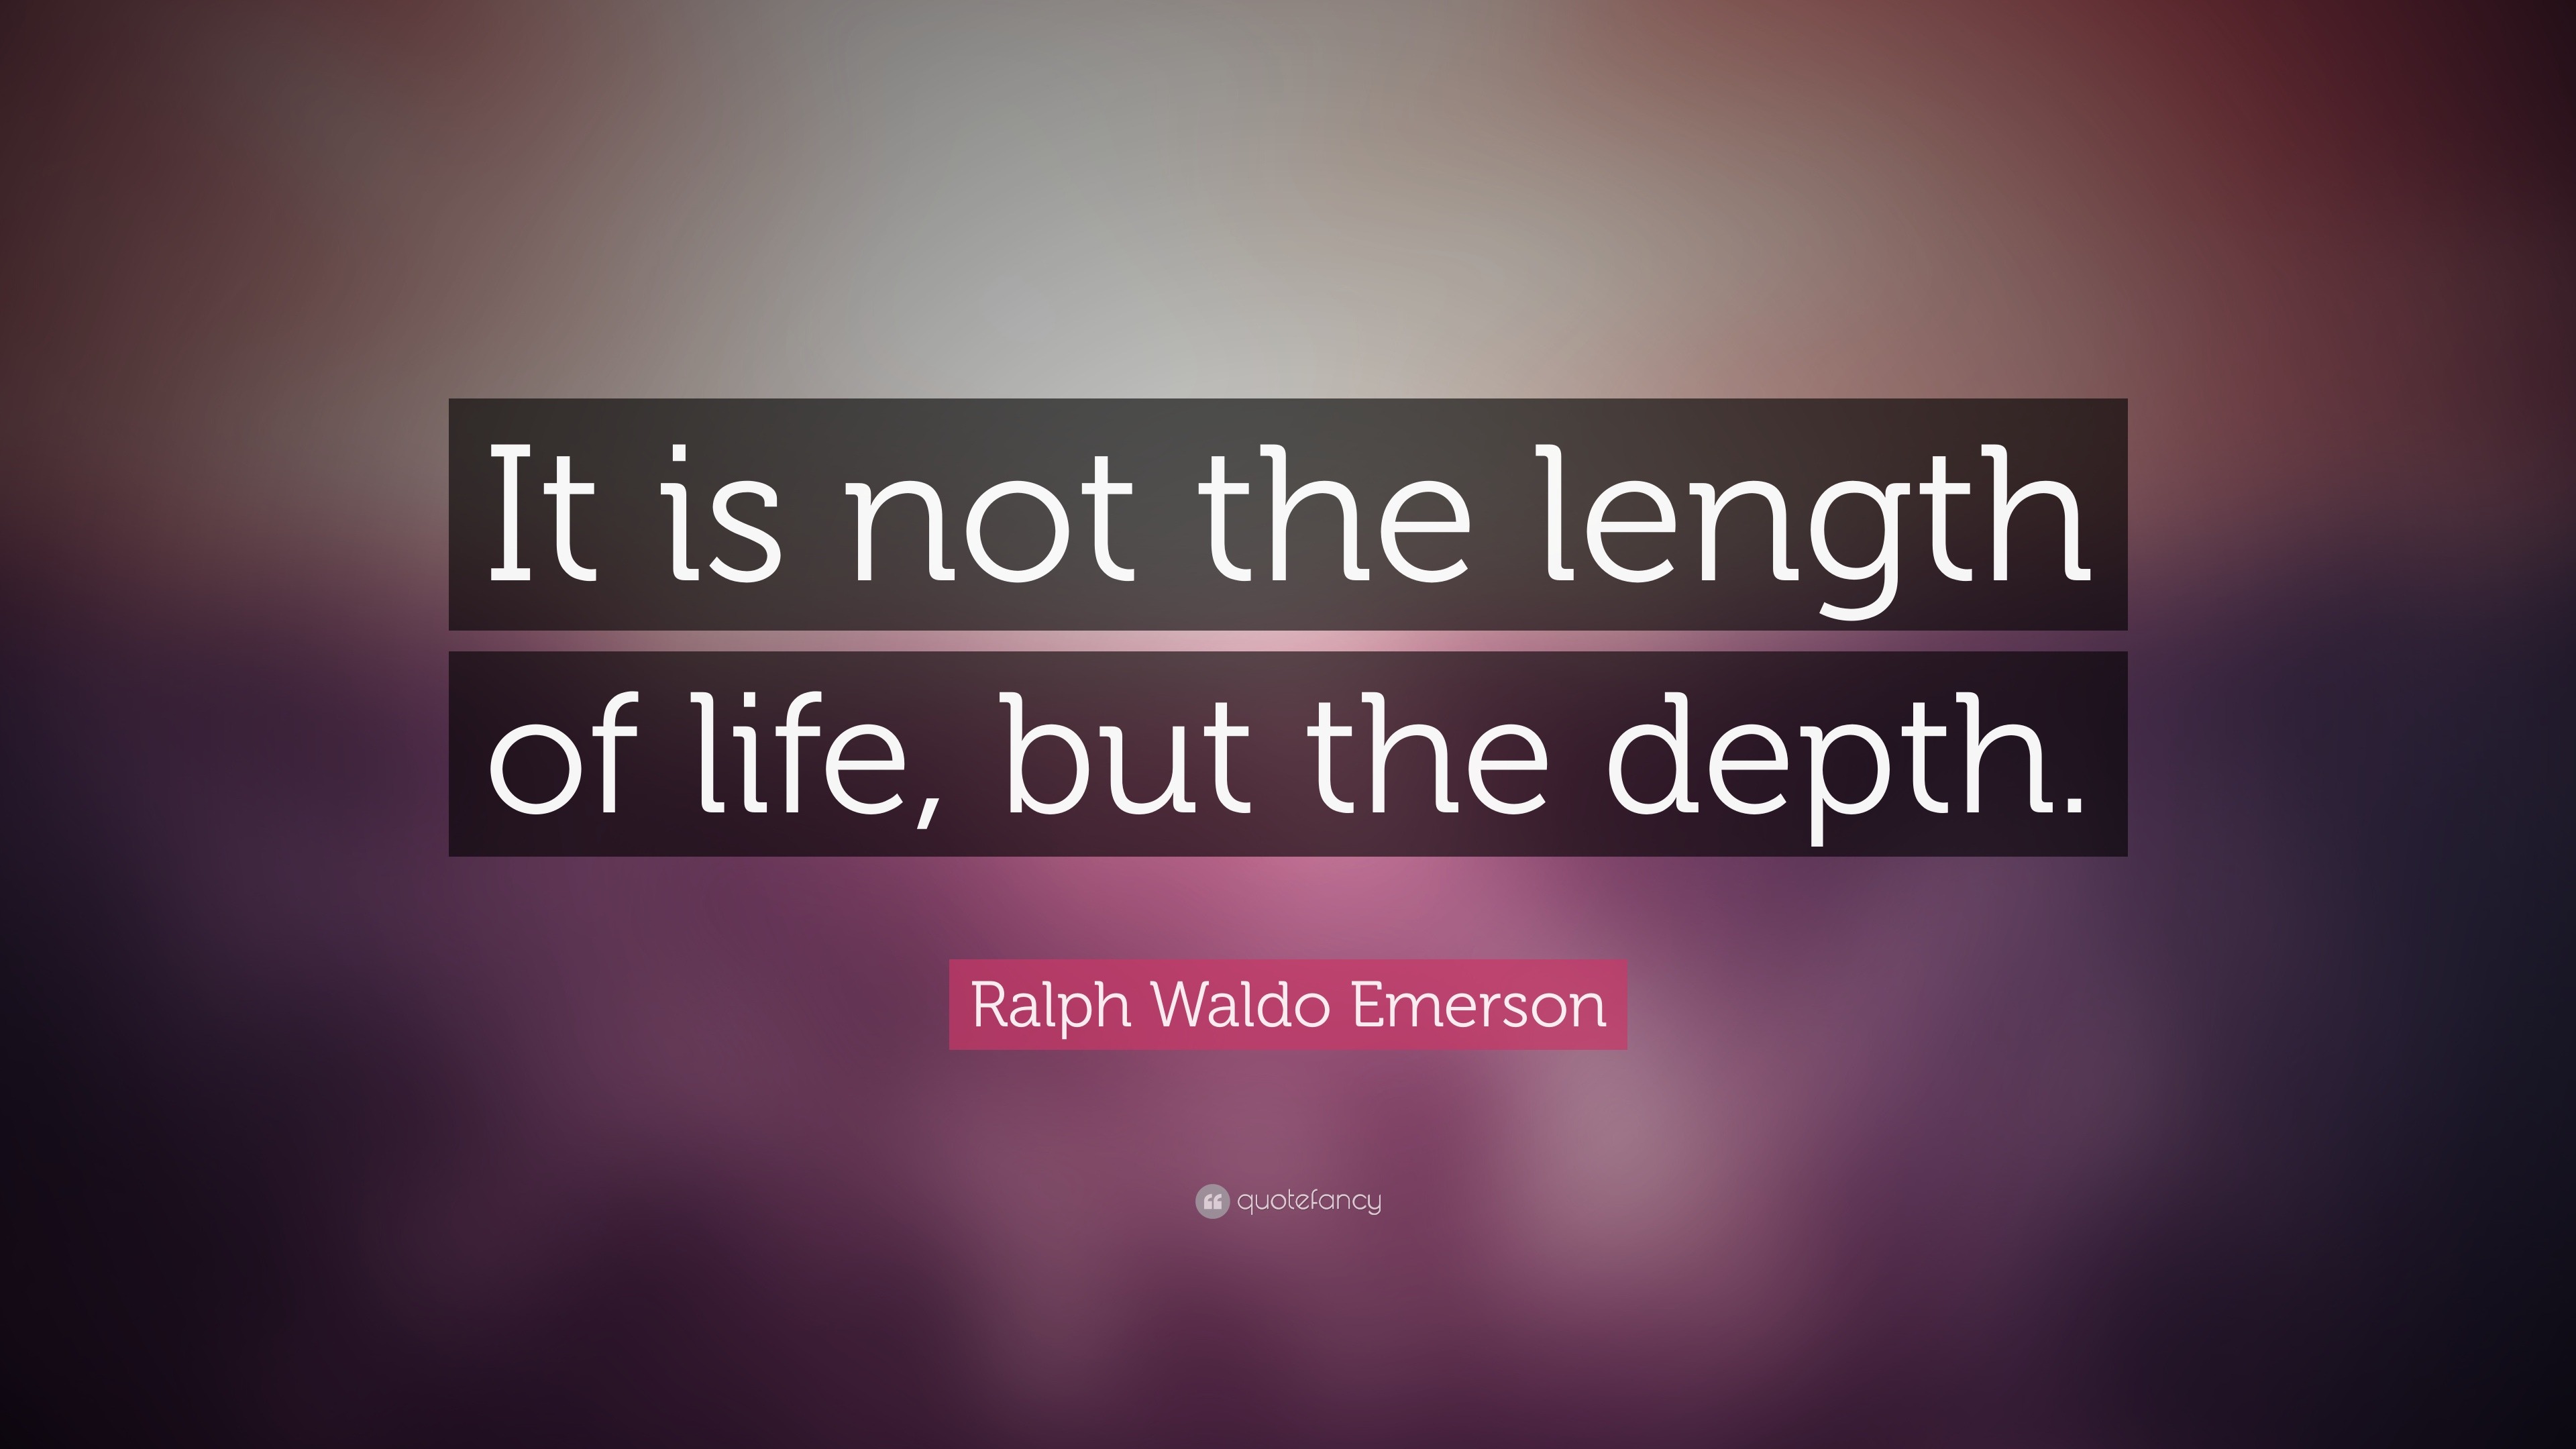 Ralph Waldo Emerson Quote: “It is not the length of life, but the depth